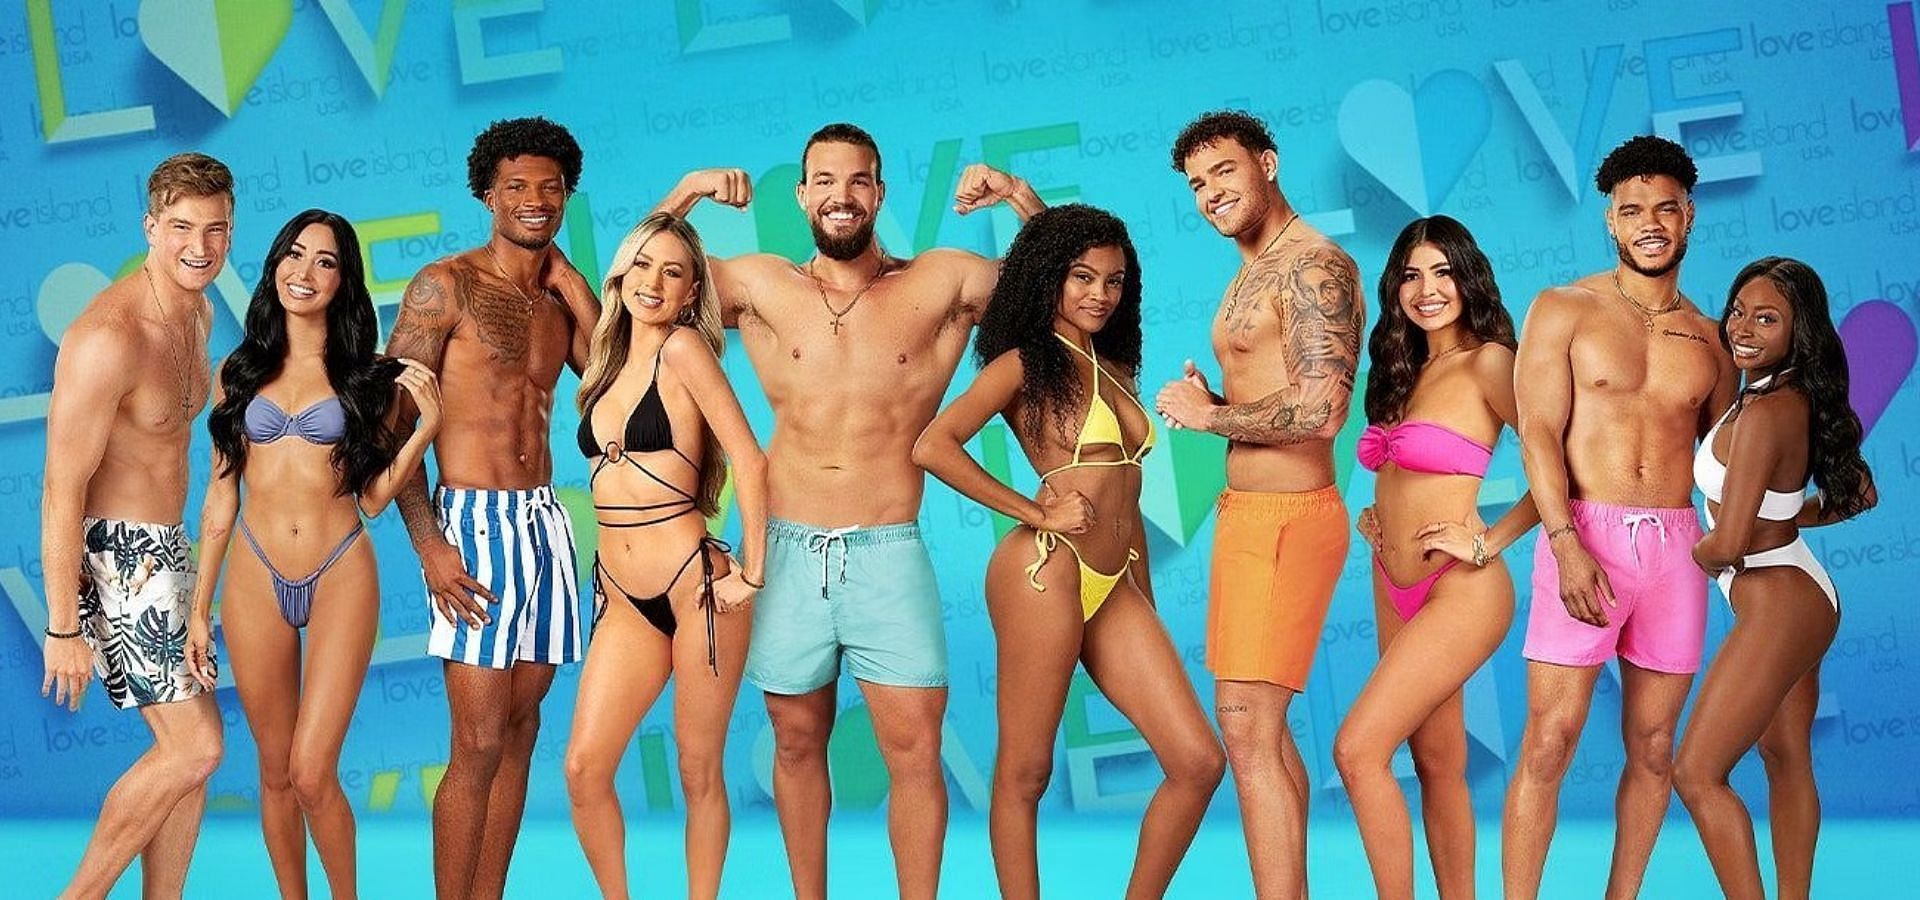 Love Island USA Season 6 potential release date, plot, and more on Peacock